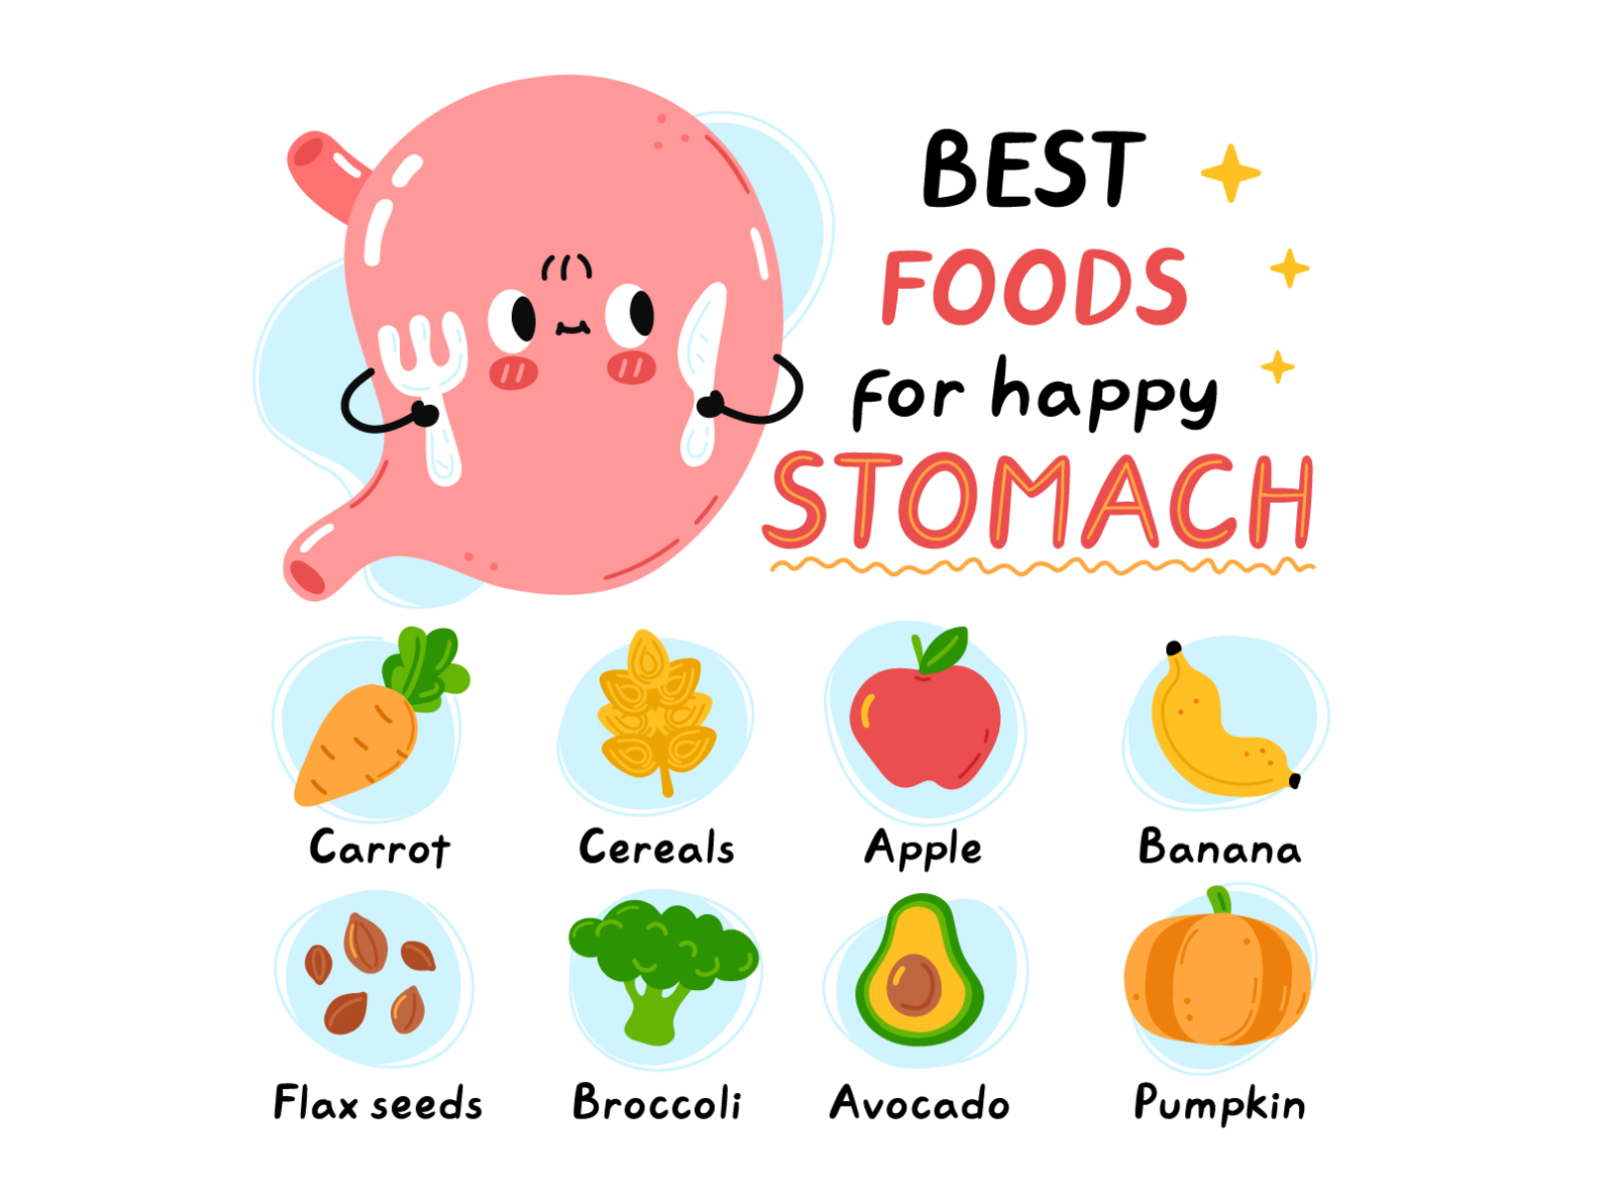 Best foods for happy stomach intestine fruits vegetables happy healthy poster infographic design kawaii cute cartoon character illustration